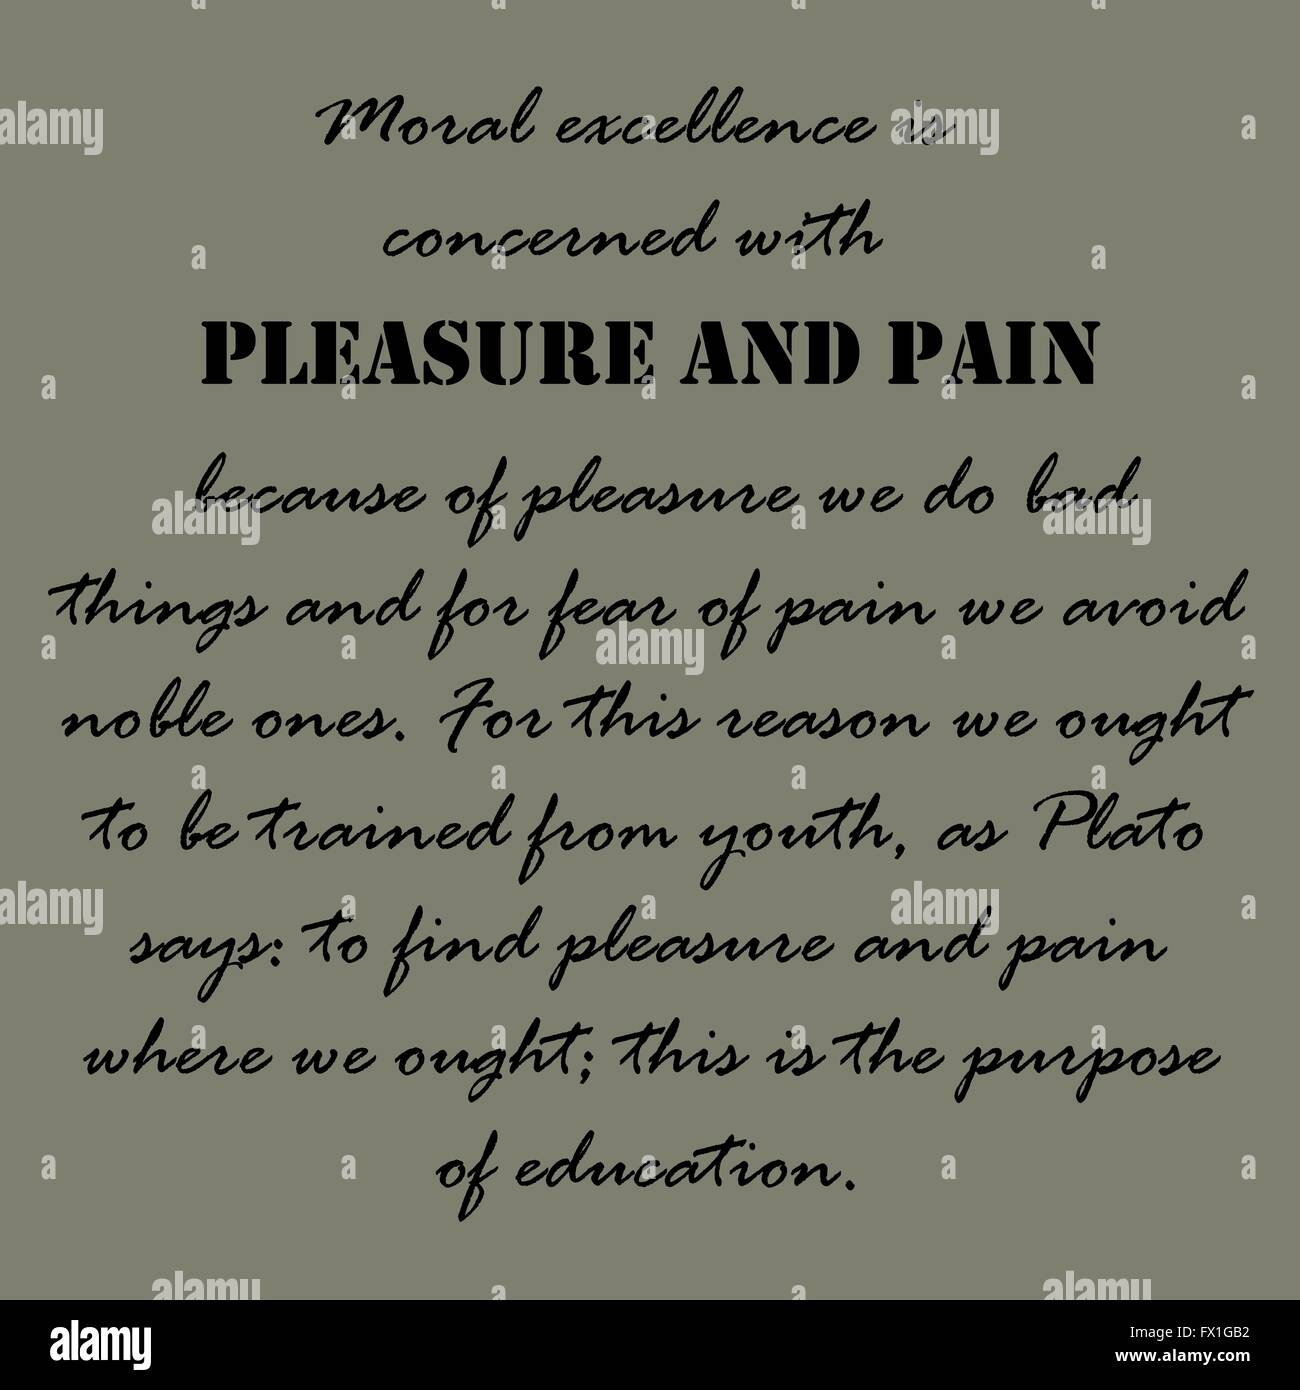 Moral excellence is concerned with pleasure and pain. Aristotle ...